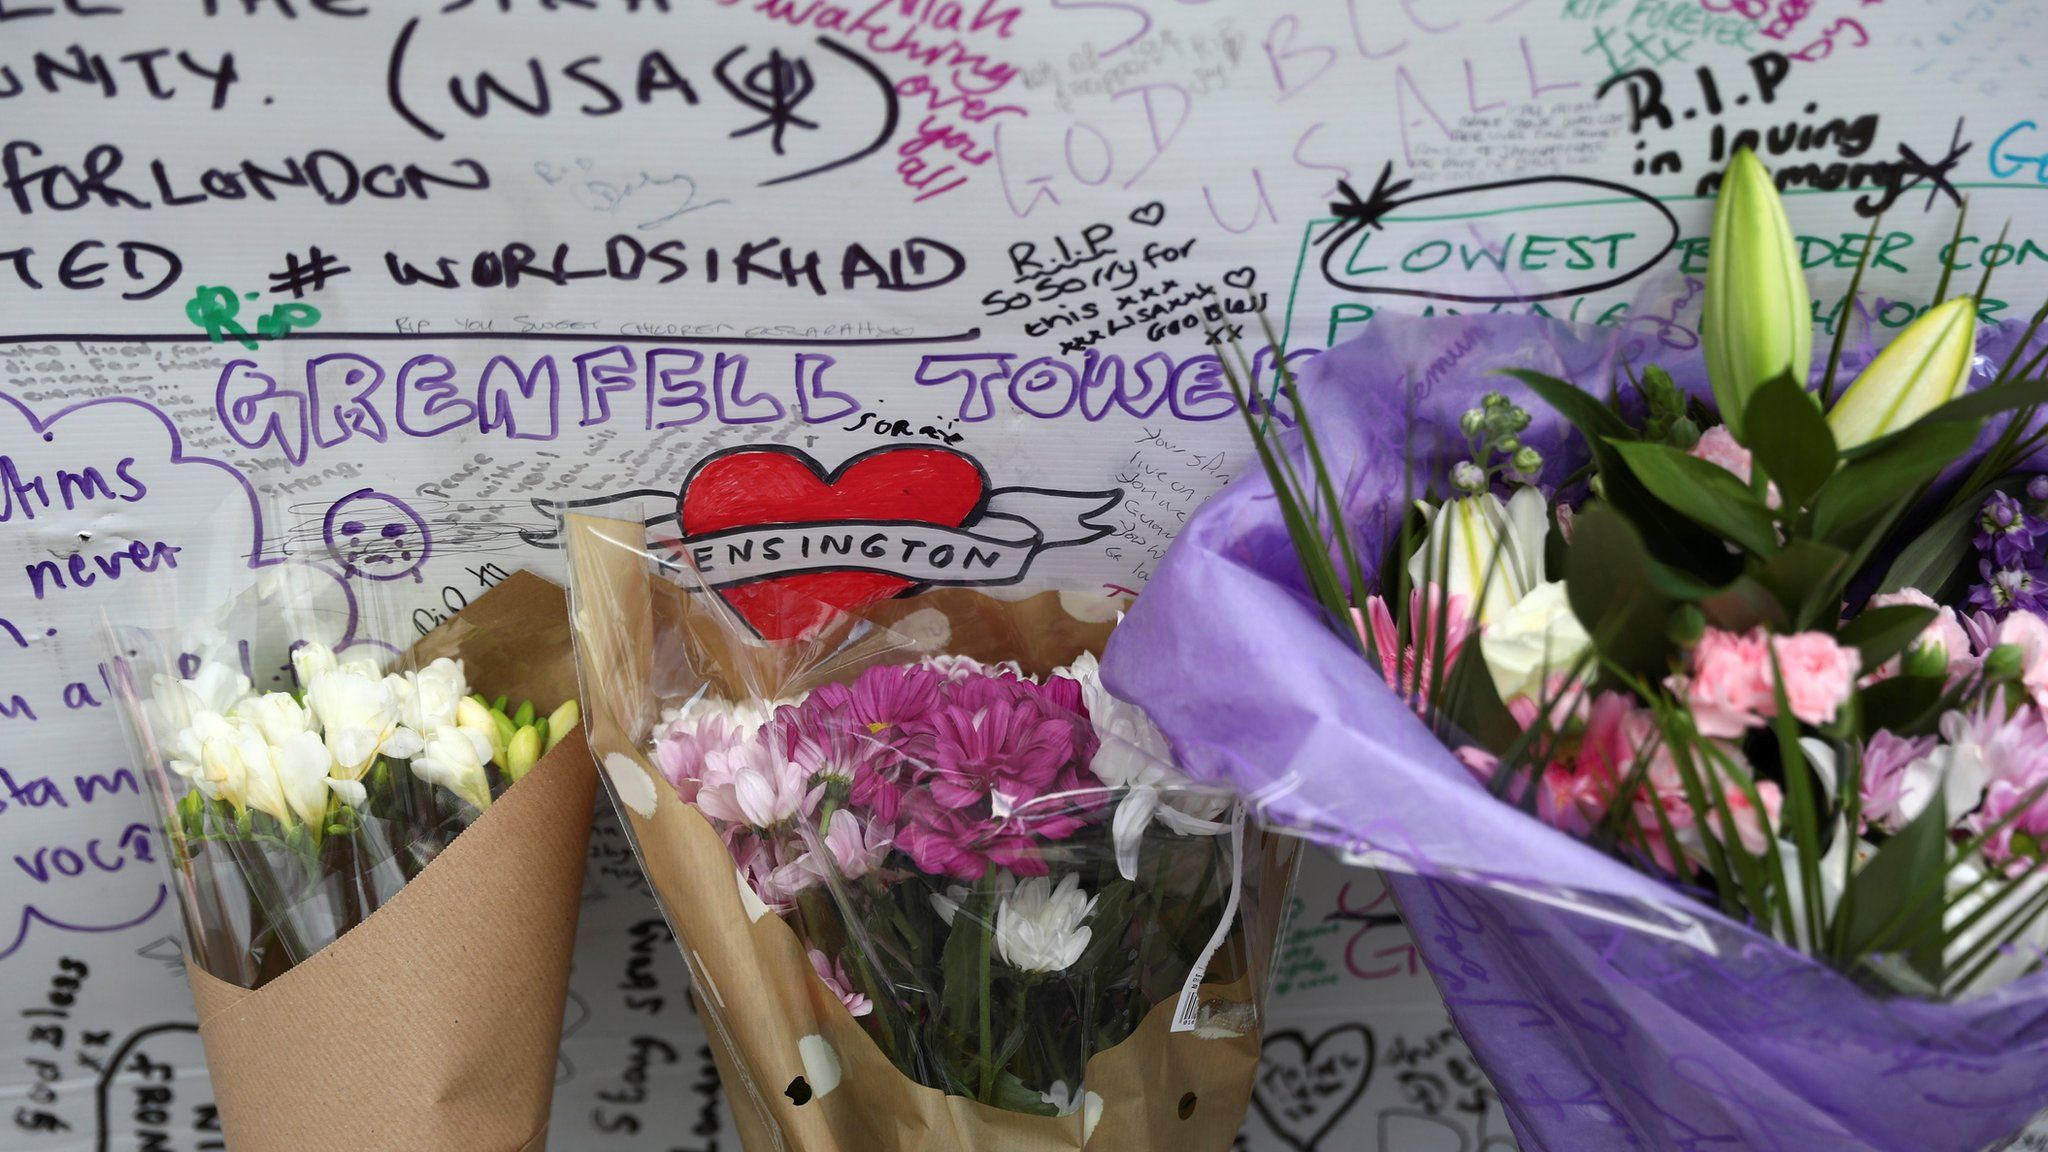 Tributes at Grenfell Tower